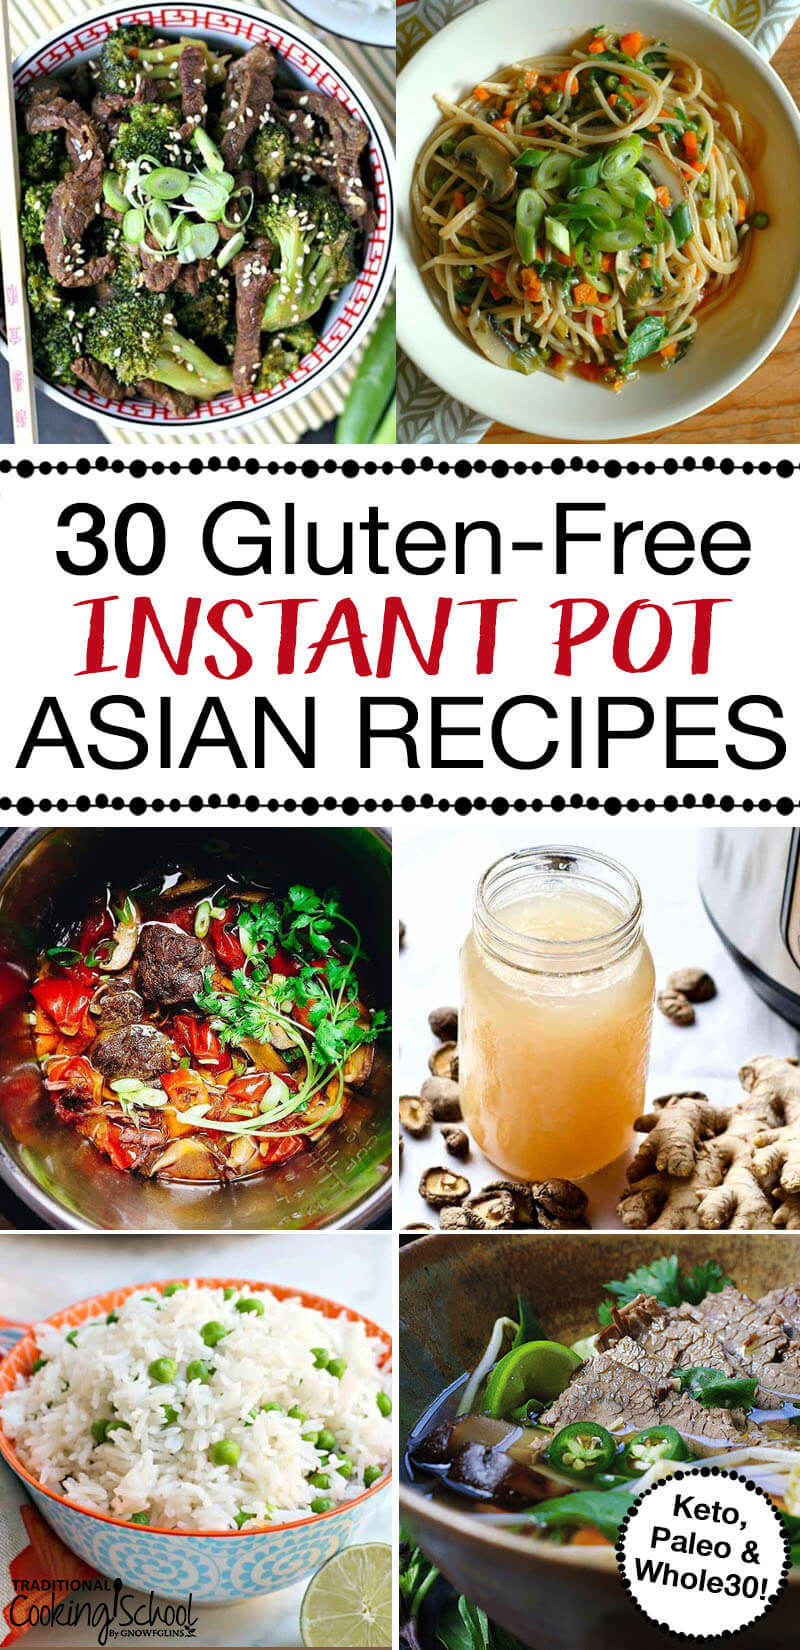 photo collage of Paleo, Whole30, and Keto Asian recipes, including vegetable lo mein and Thai chicken, with text overlay: "30 Gluten-Free Instant Pot Asian Recipes"